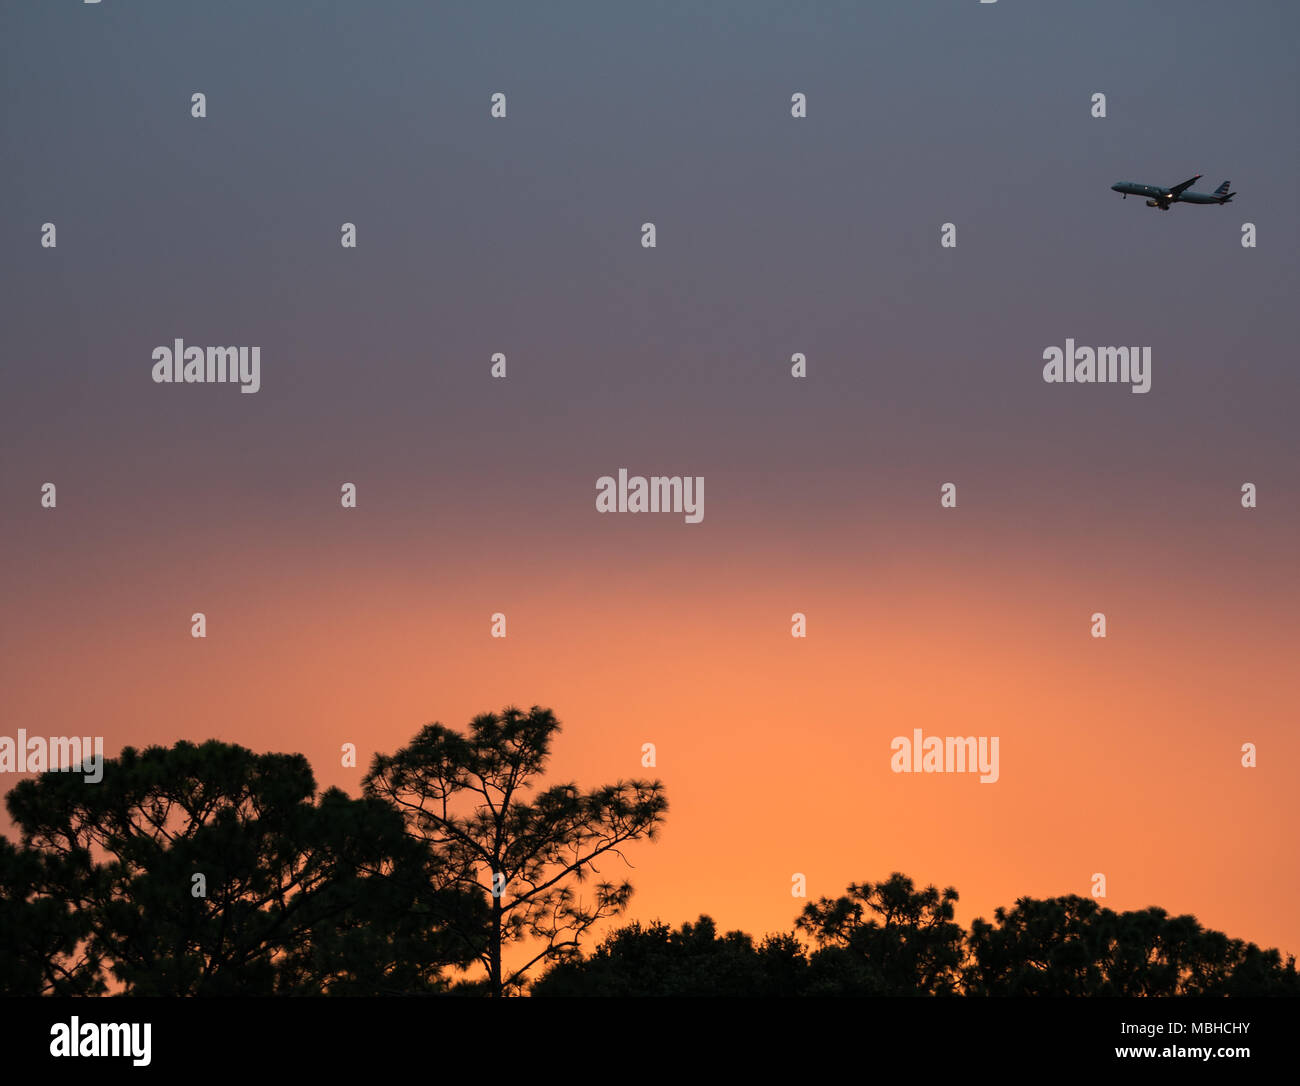 ORLANDO, FLORIDA - AUGUST 20, 2017: An American Airlines flight begins its descent to MCO International Airport at dusk. Stock Photo